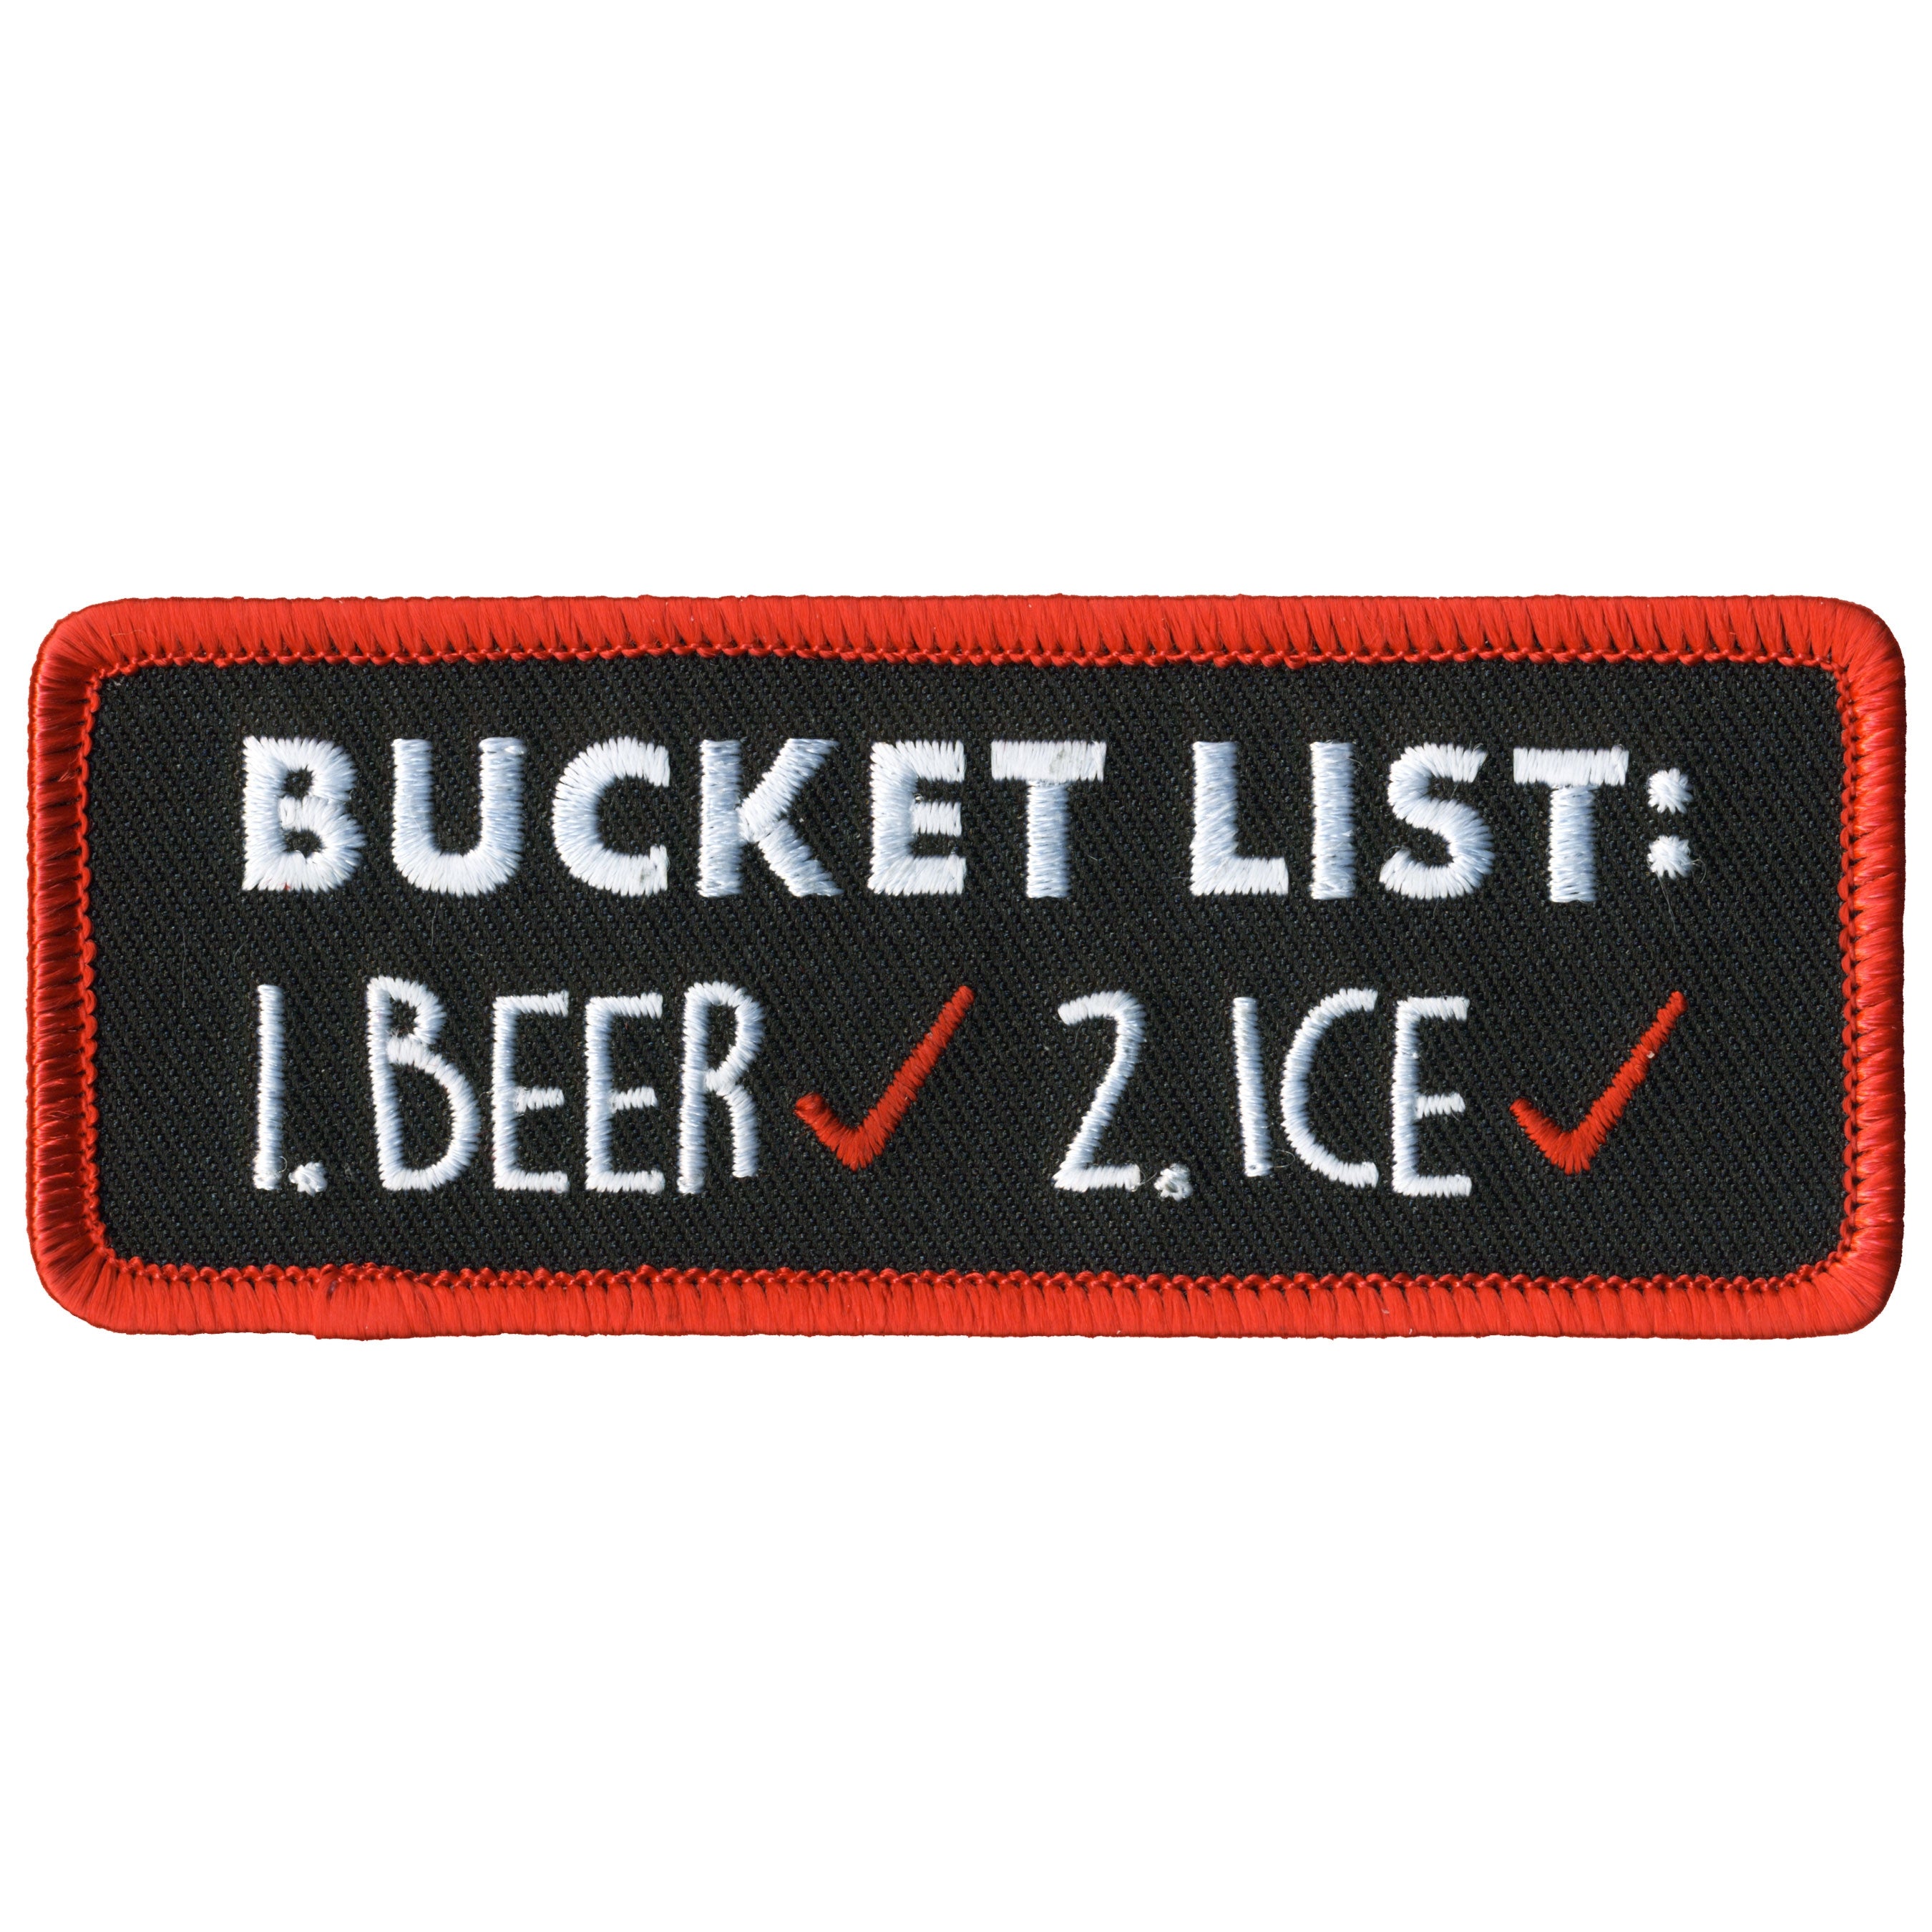 Hot Leather Bucket List Patch